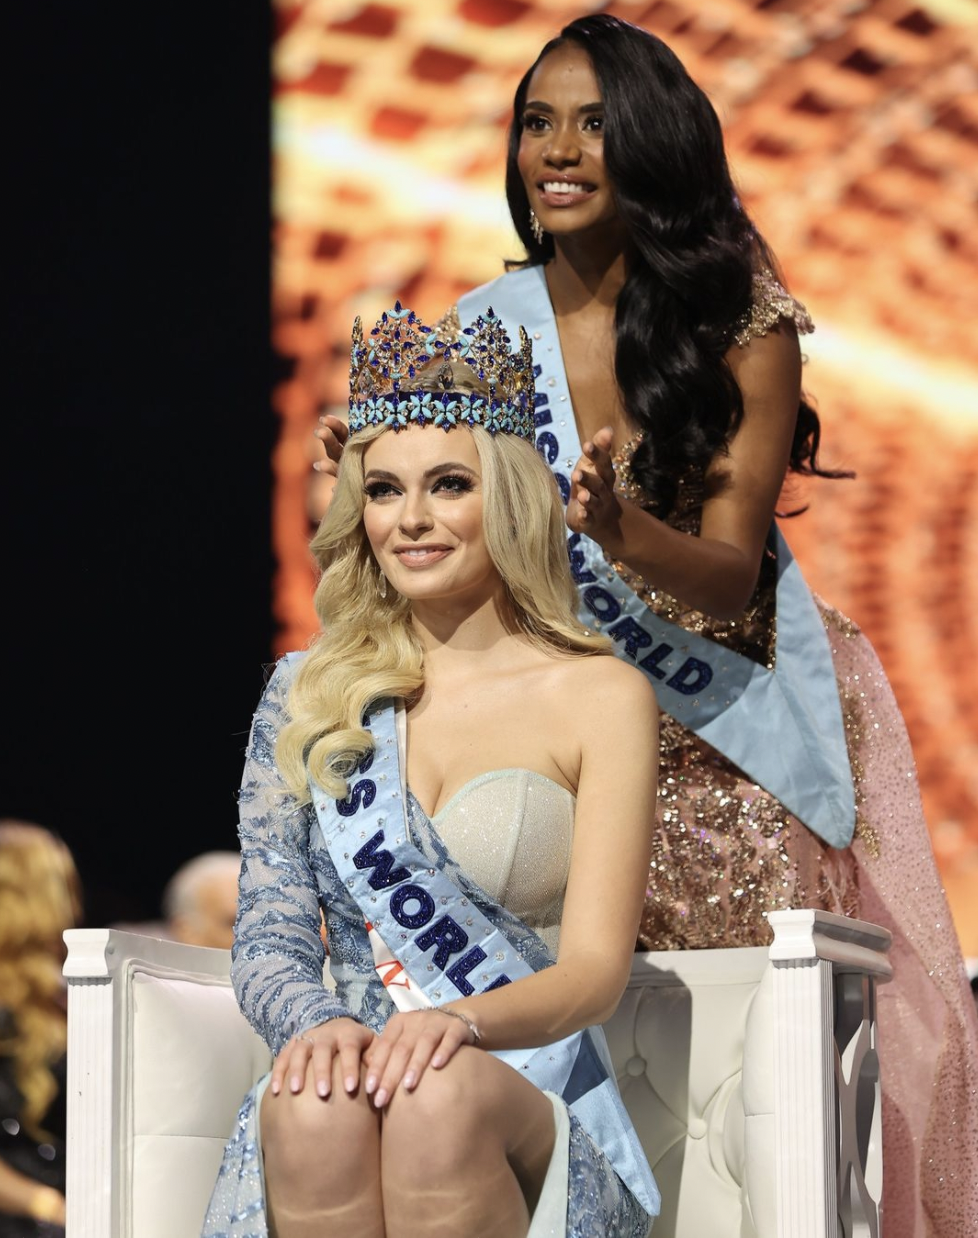 Karolina Biewleska from Poland is the 70th Miss World 2022 crowned by 69th Miss World Tony-Ann Singh